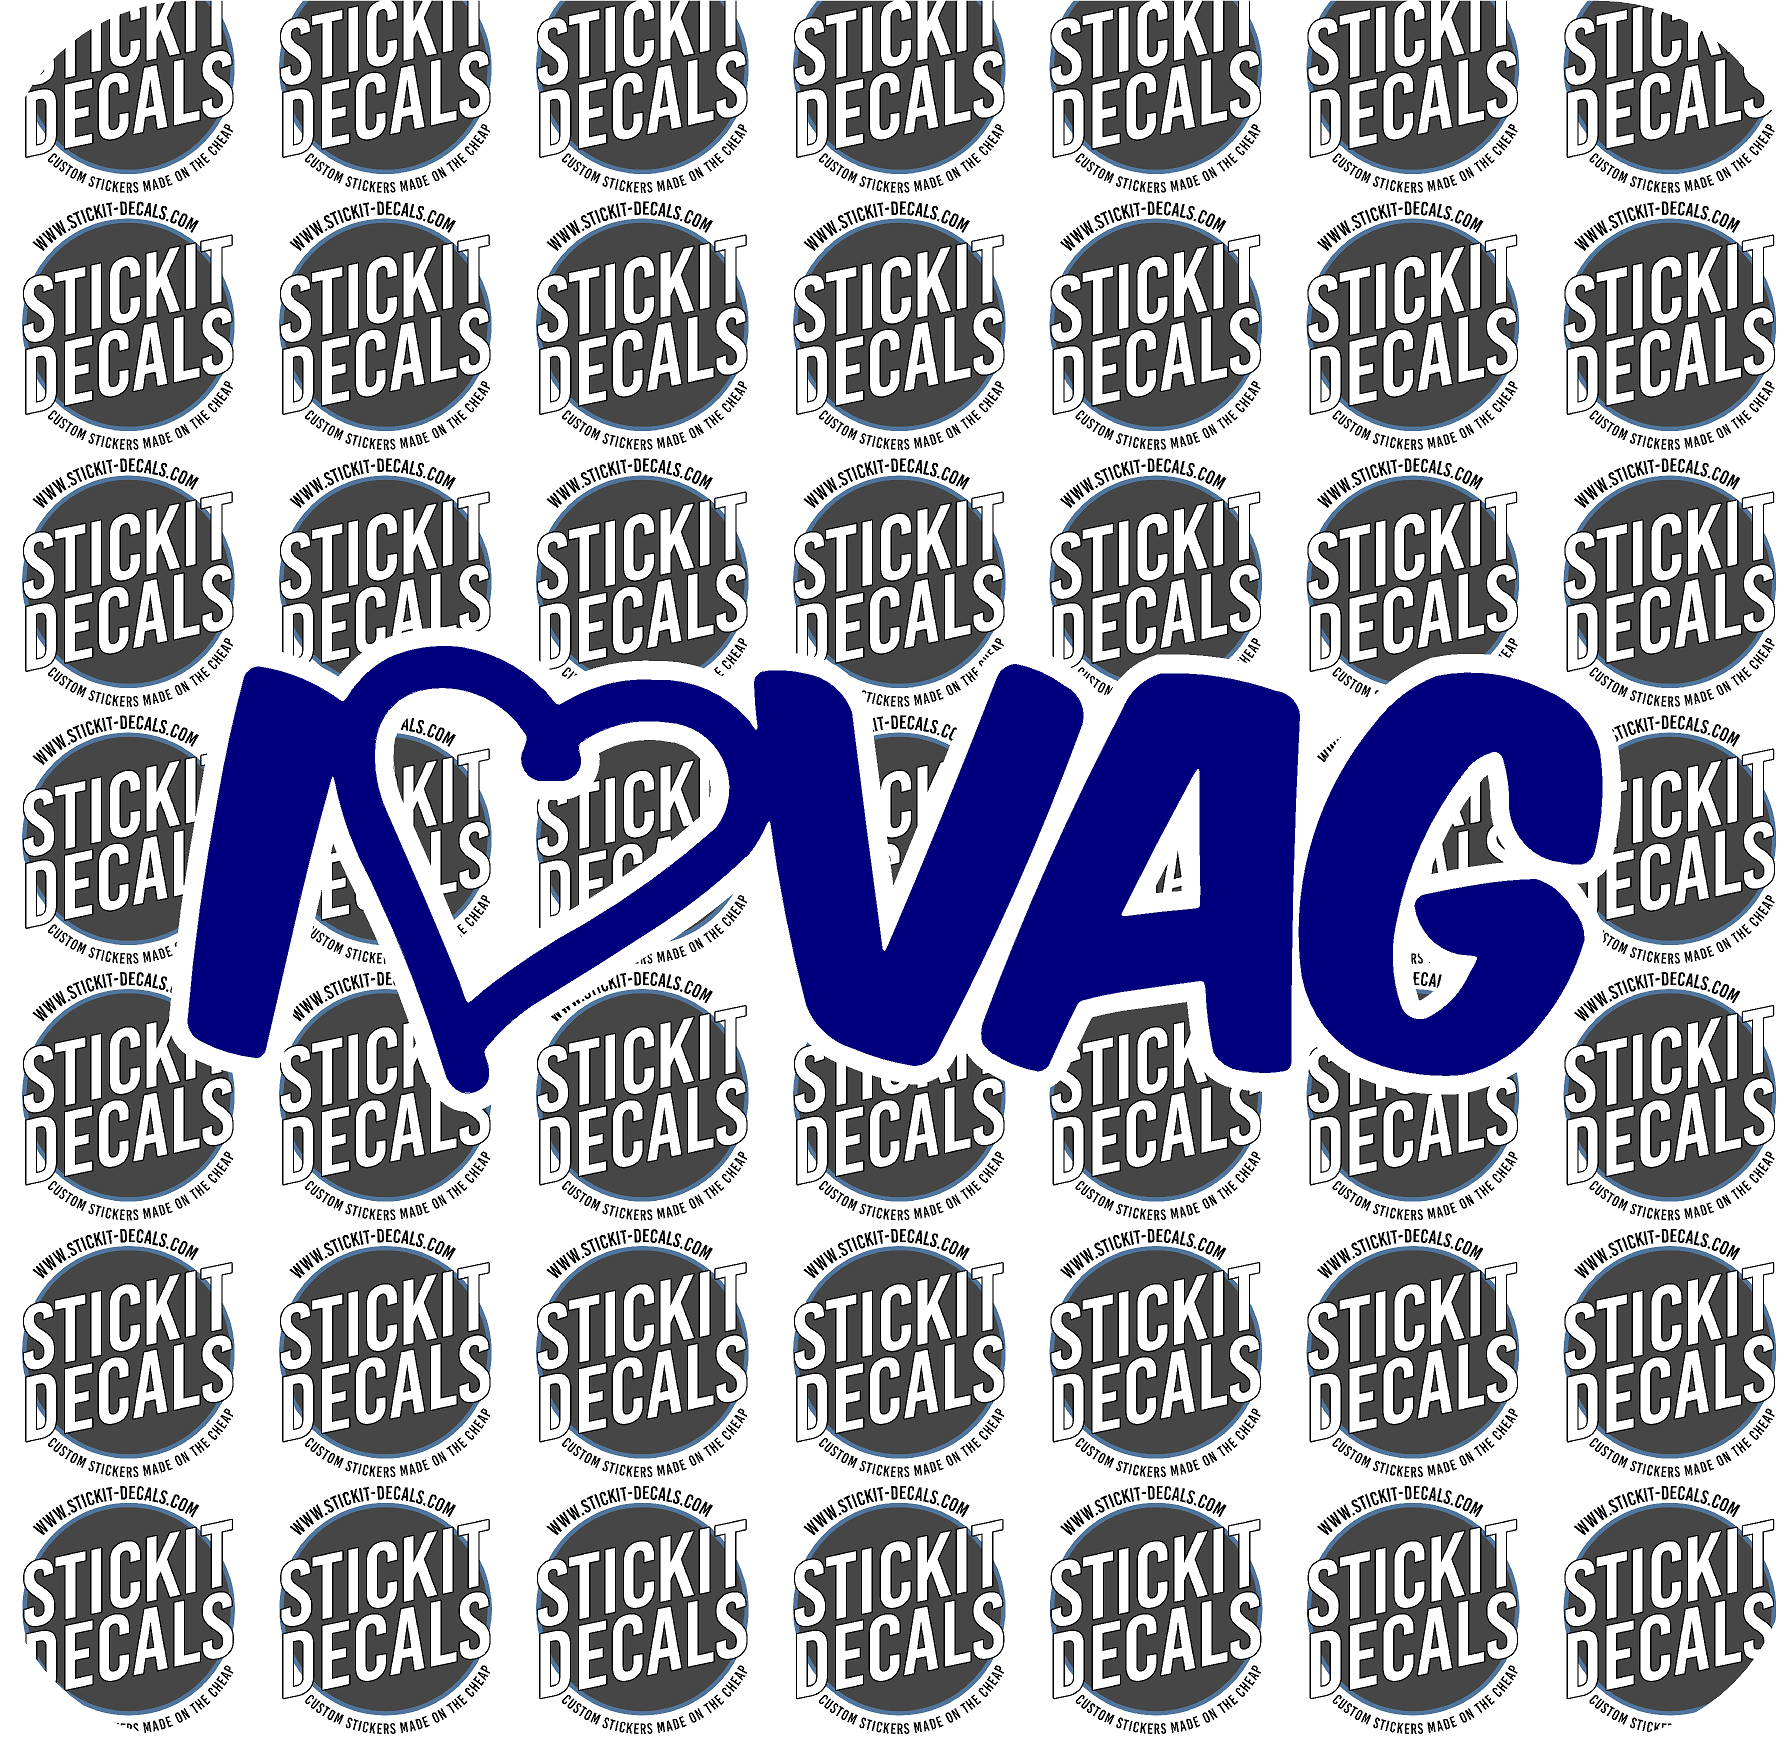 I ♥ VAG Decal Sticker - Volkswagen Auto Group VWAG VW